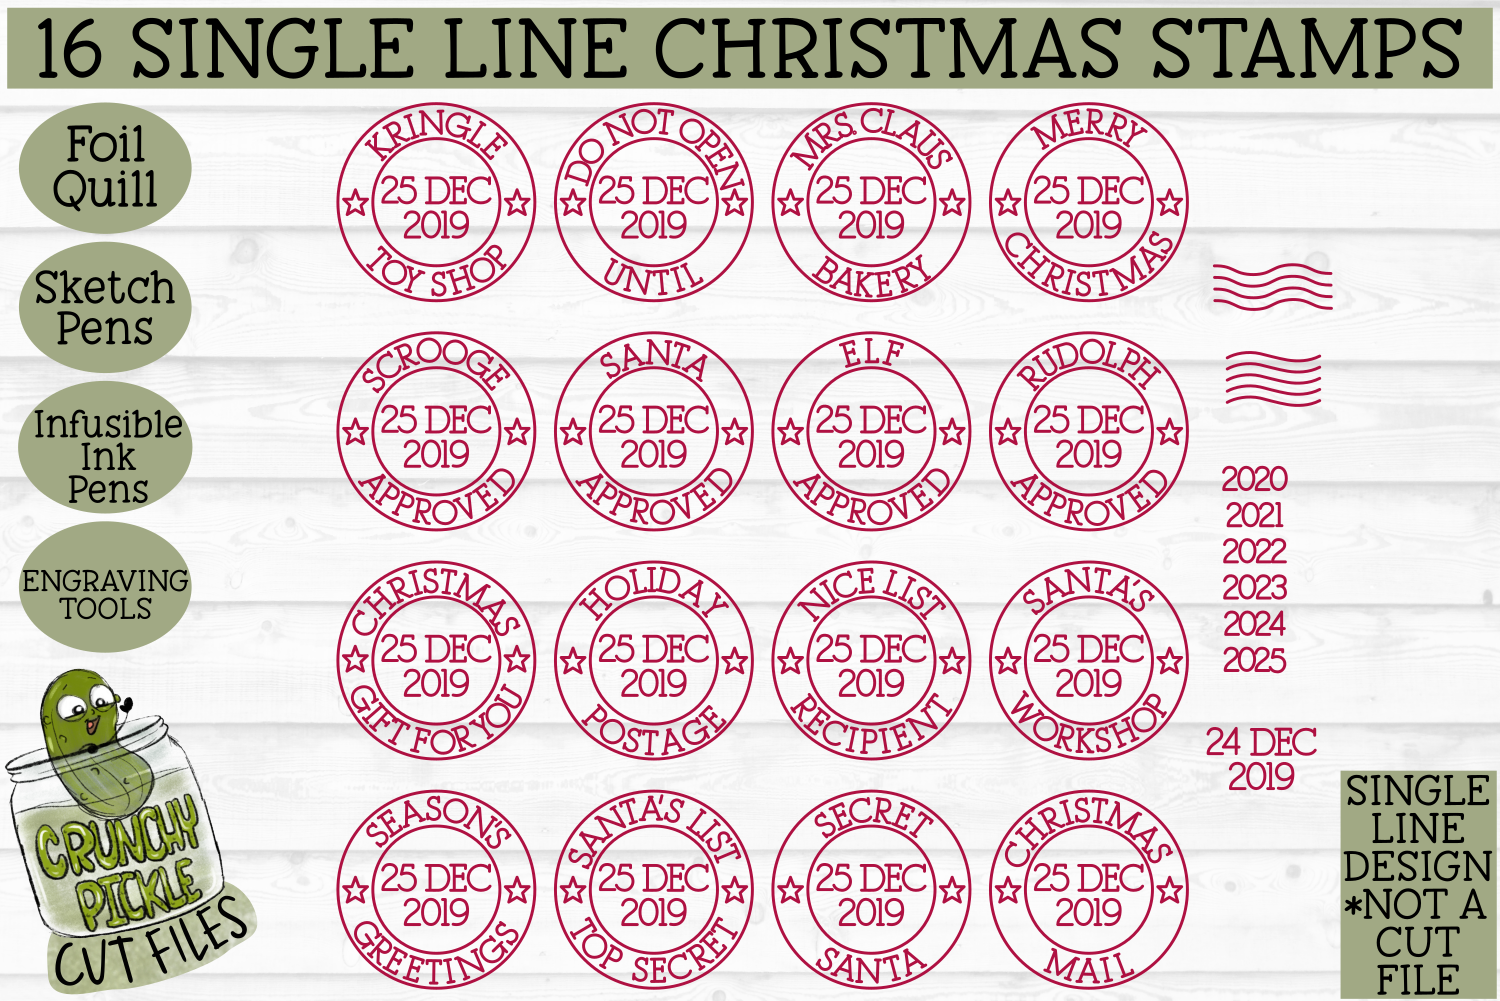 Foil Quill 16 Christmas Stamps By Crunchy Pickle Thehungryjpeg Com